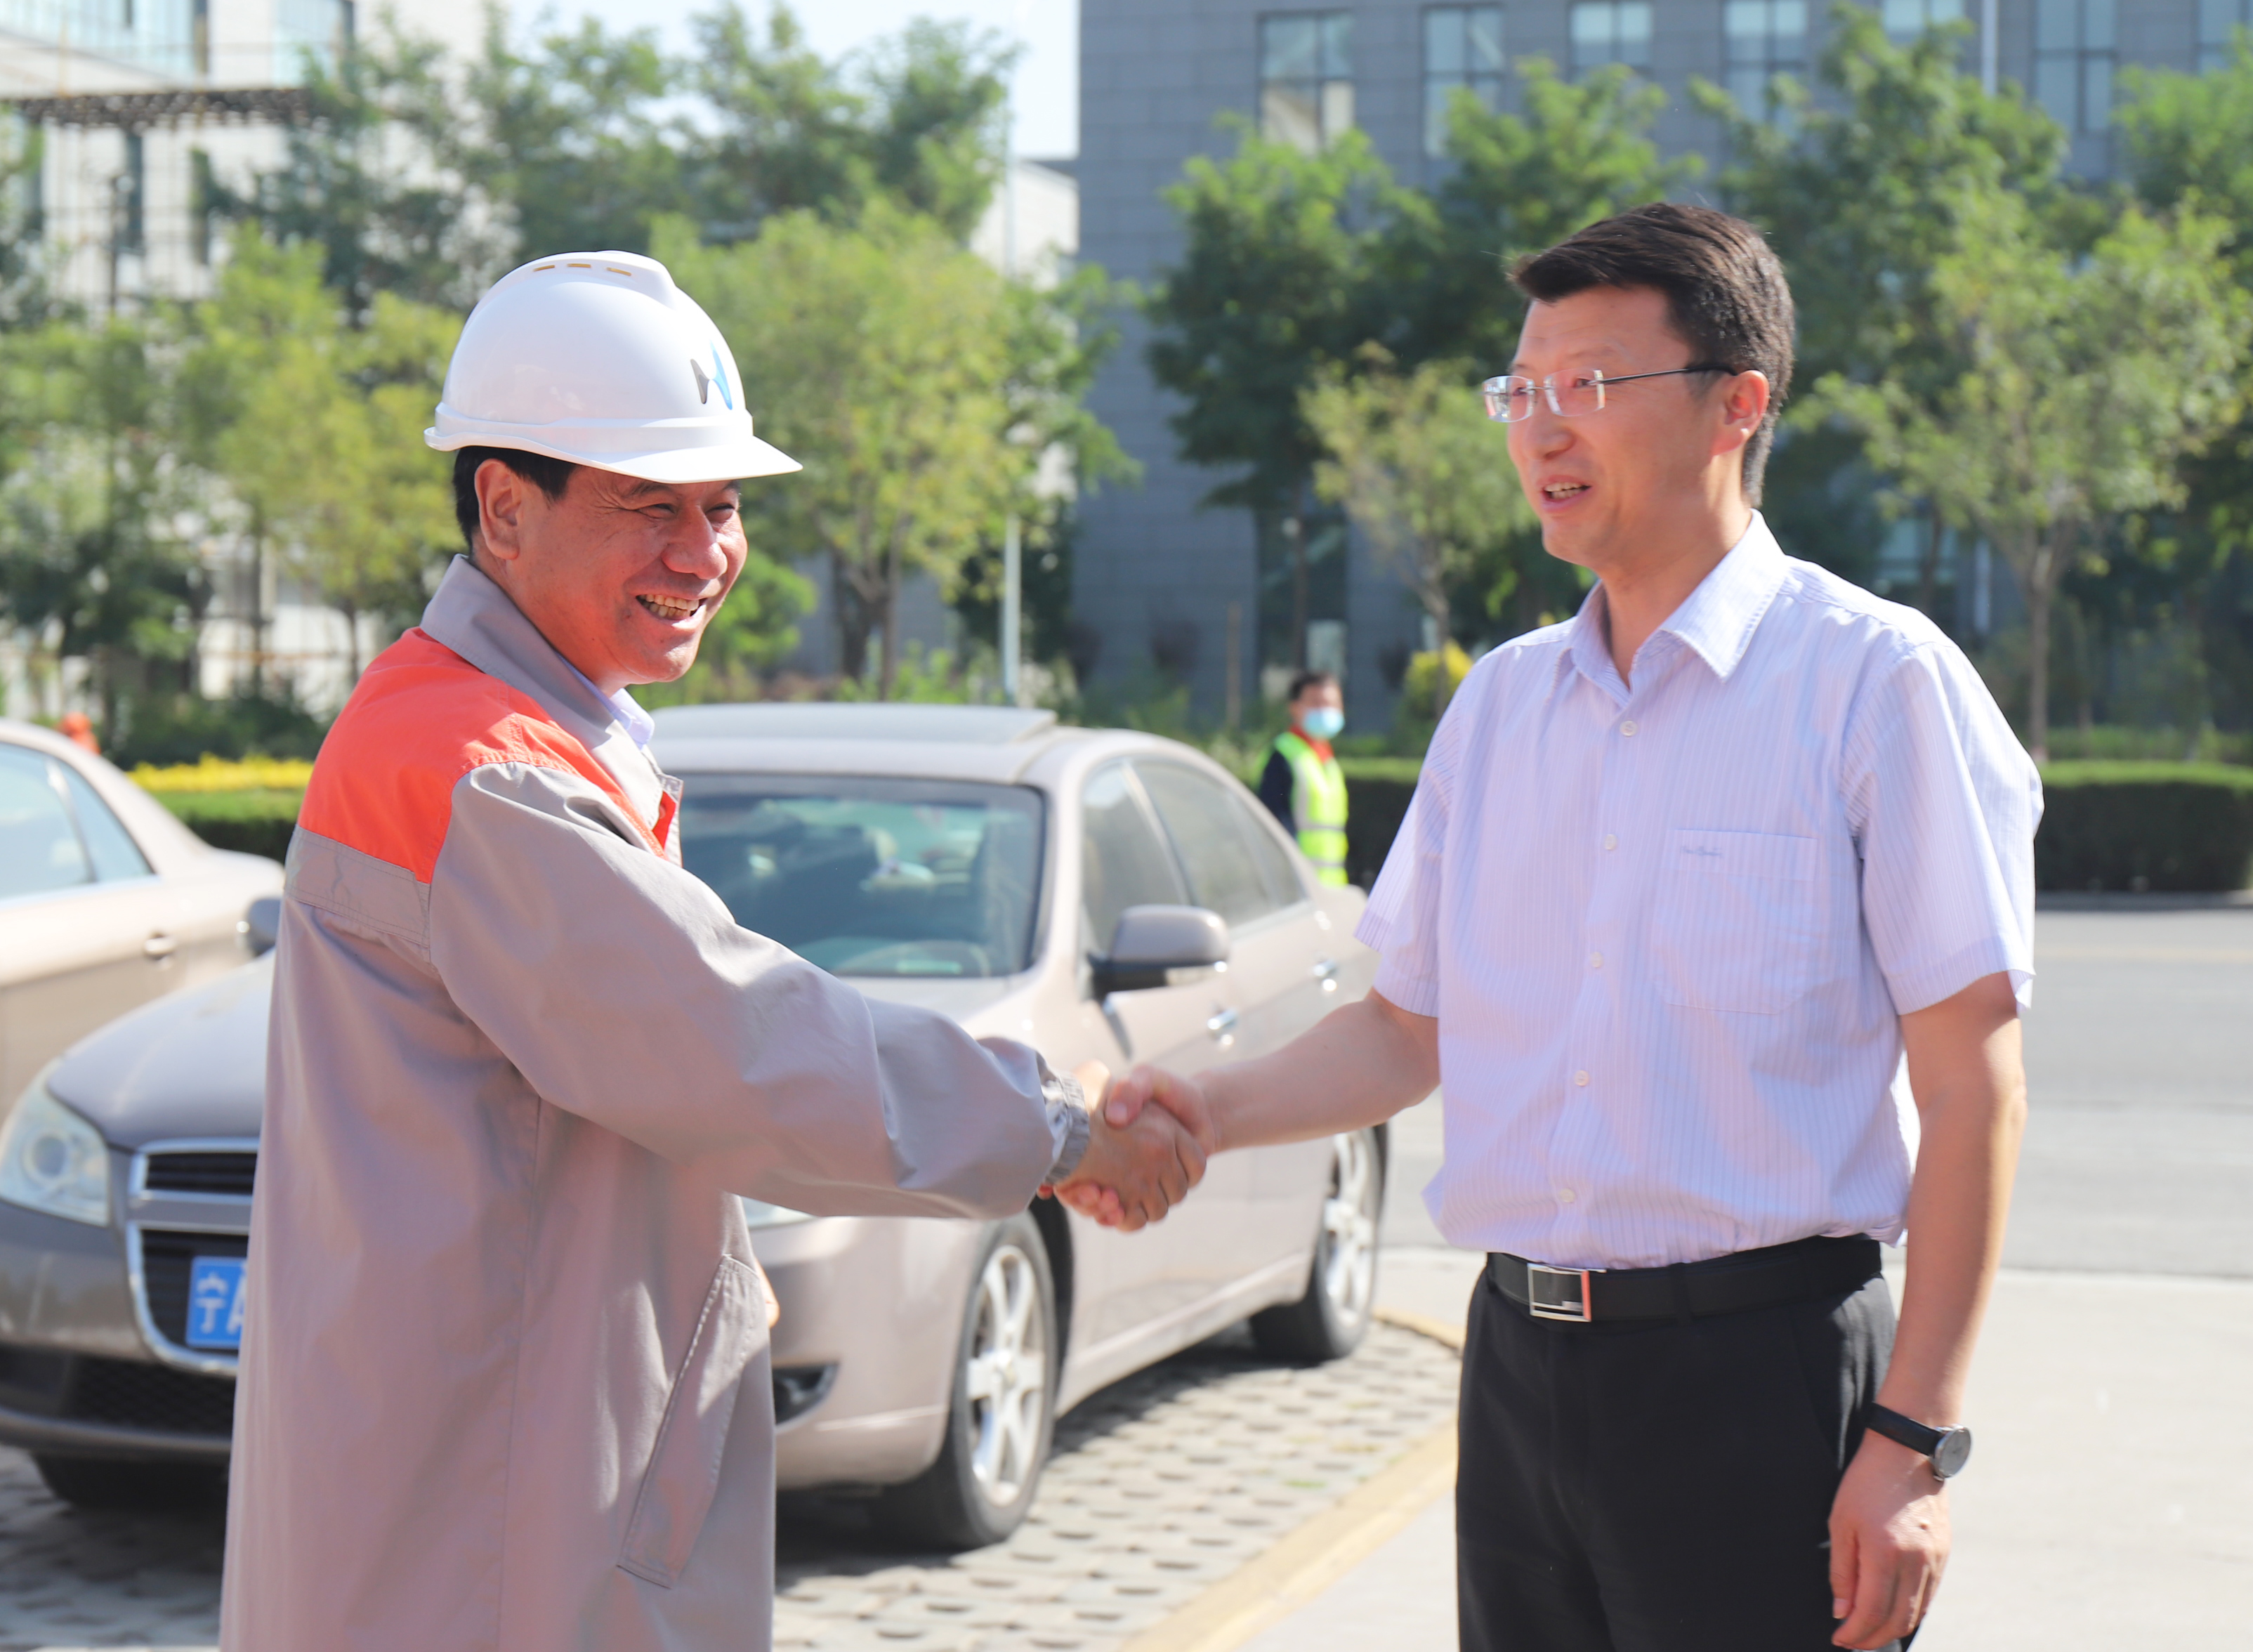 Leaders of relevant departments in Yinchuan visited Hanas LNG to inspect and guide safety production